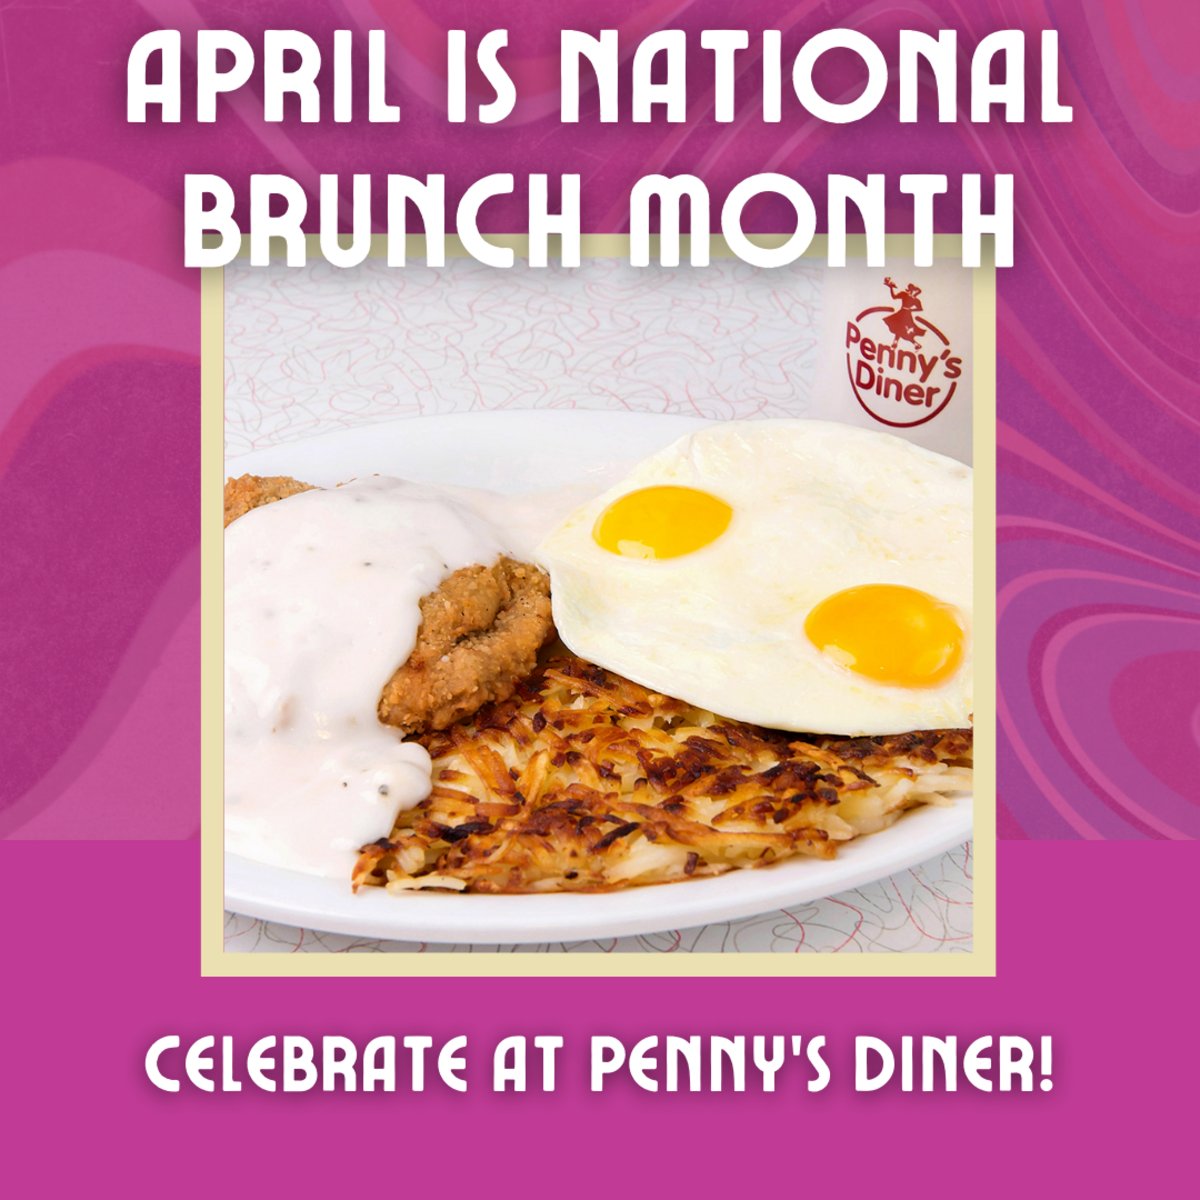 Brunch lovers unite! April is #NationalBrunchMonth, and #PennysDiner is THE place to celebrate with our #alldaybreakfast featuring classics, such as our Ranch Breakfast, Chicken and Waffles, and Breakfast Sandwich. Now that's #brunch goals!